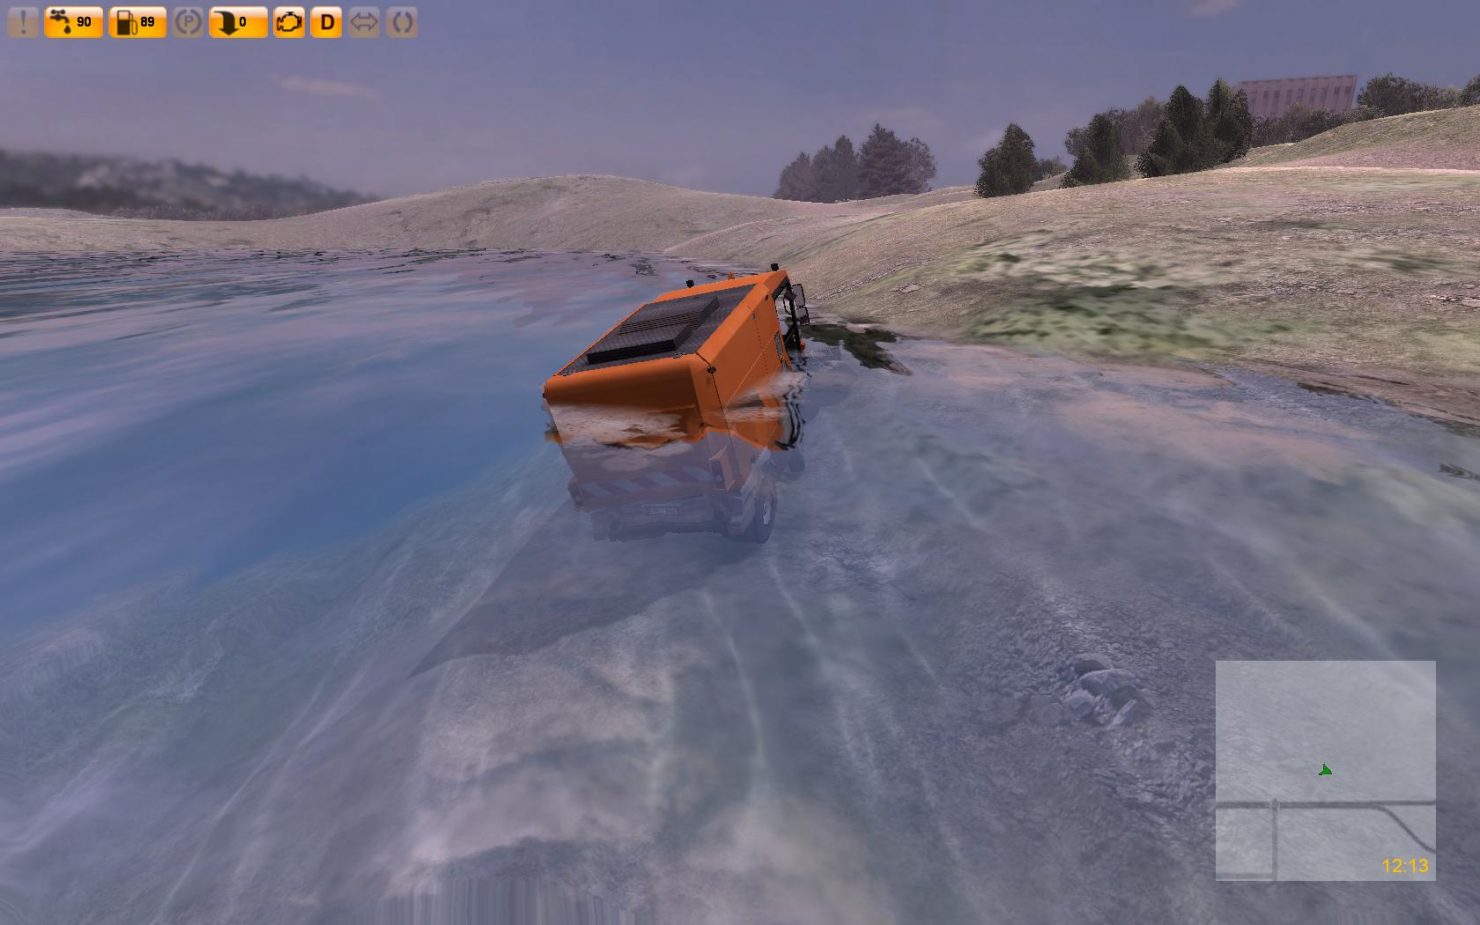 As spring approaches, the street sweeper emerges from its hibernation at the bottom of the lake in search of a mate